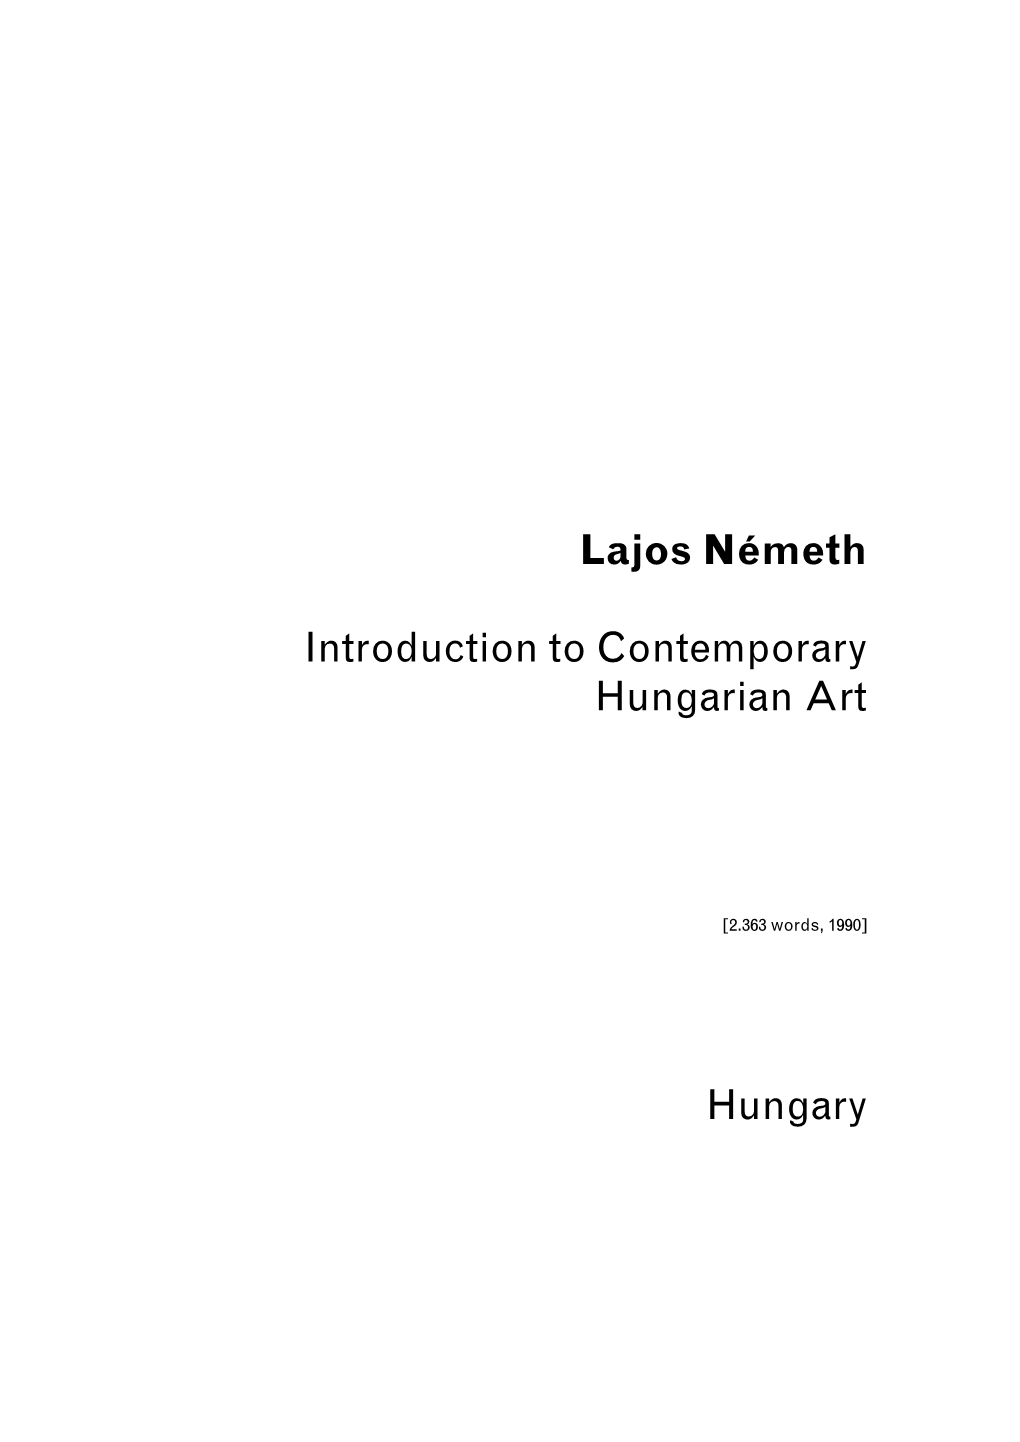 Lajos Nemeth Introduction to Hungarian Contemporary Art